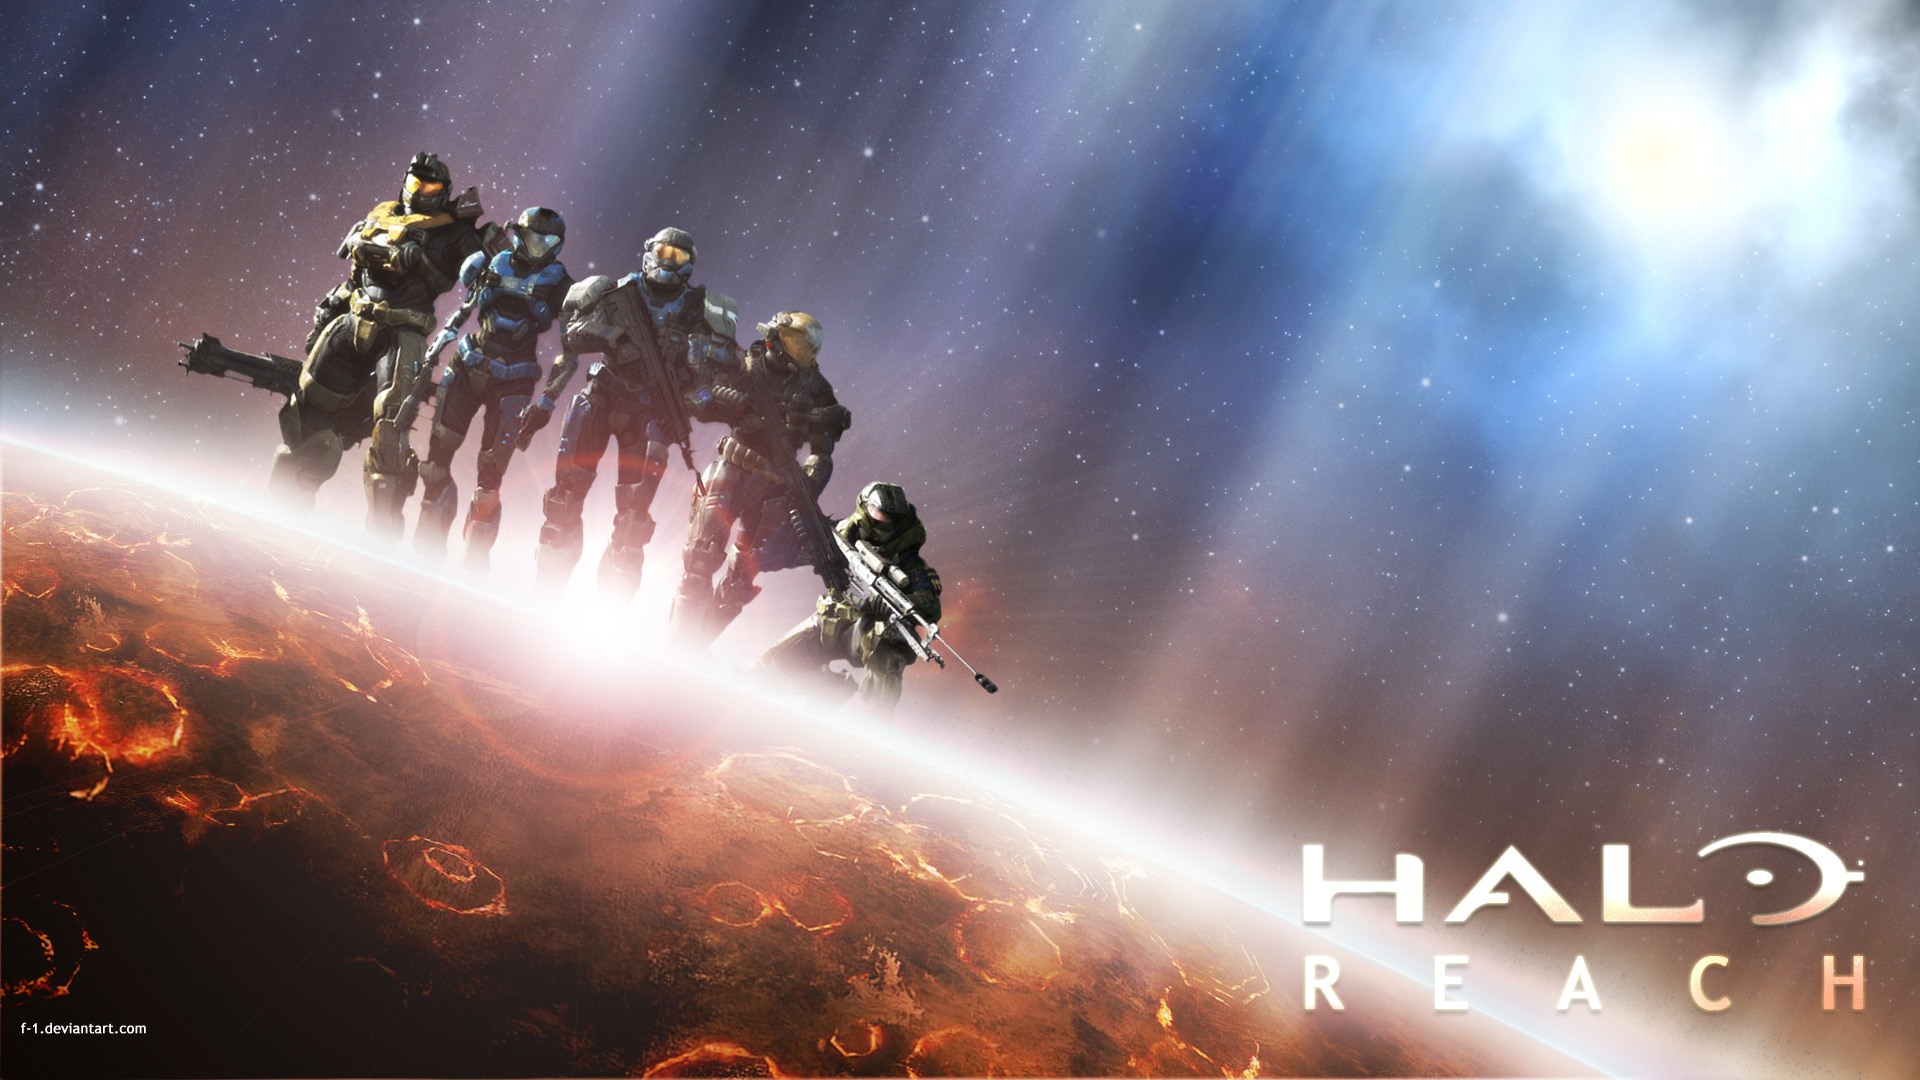 Halo game HD wallpapers #18 - 1920x1080